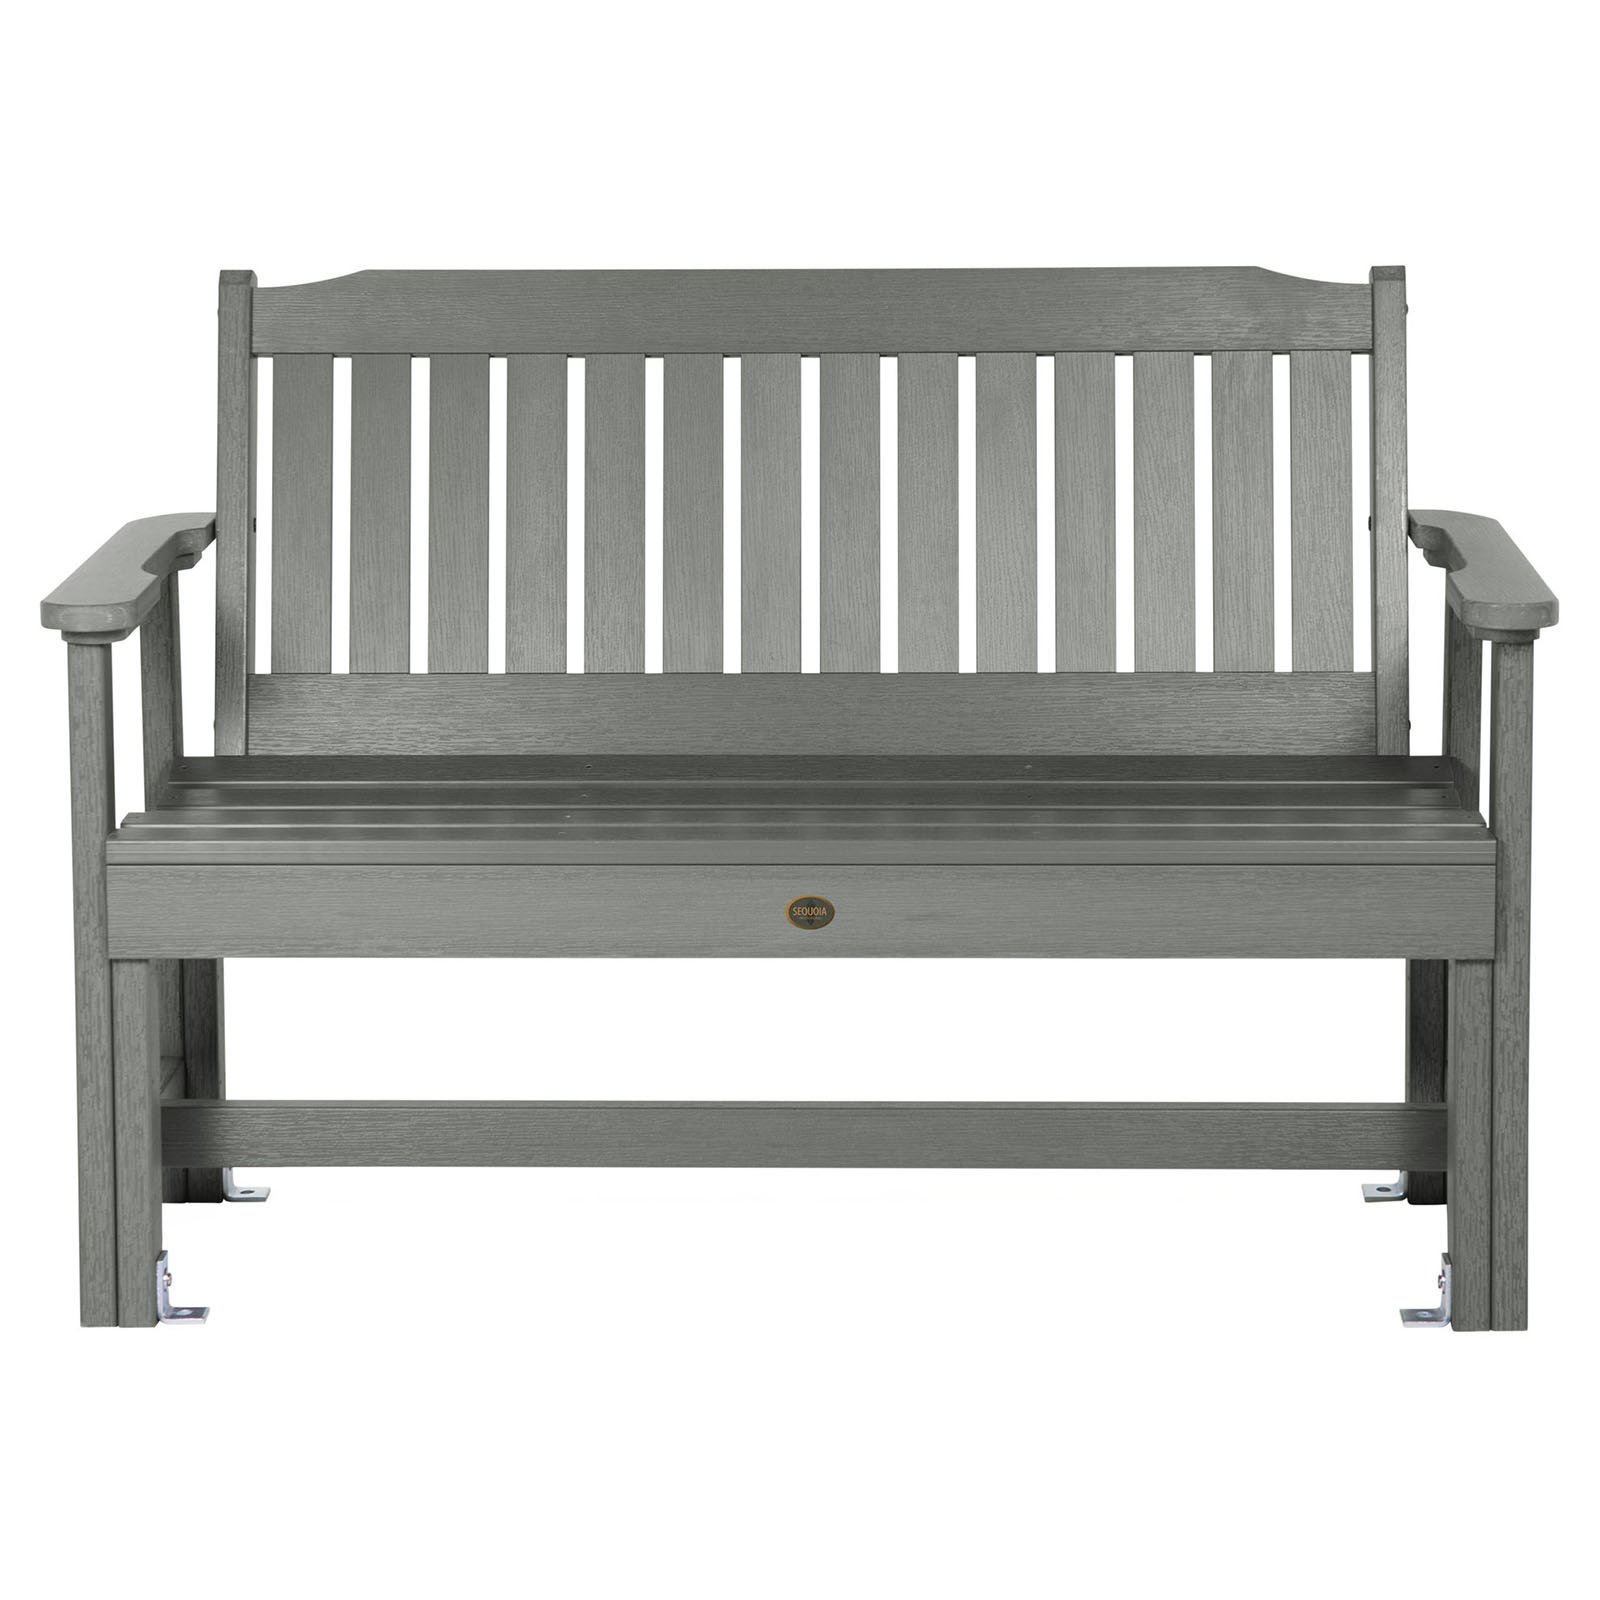 The Sequoia Professional Commercial Grade Exeter 4' Garden Bench - image 1 of 2